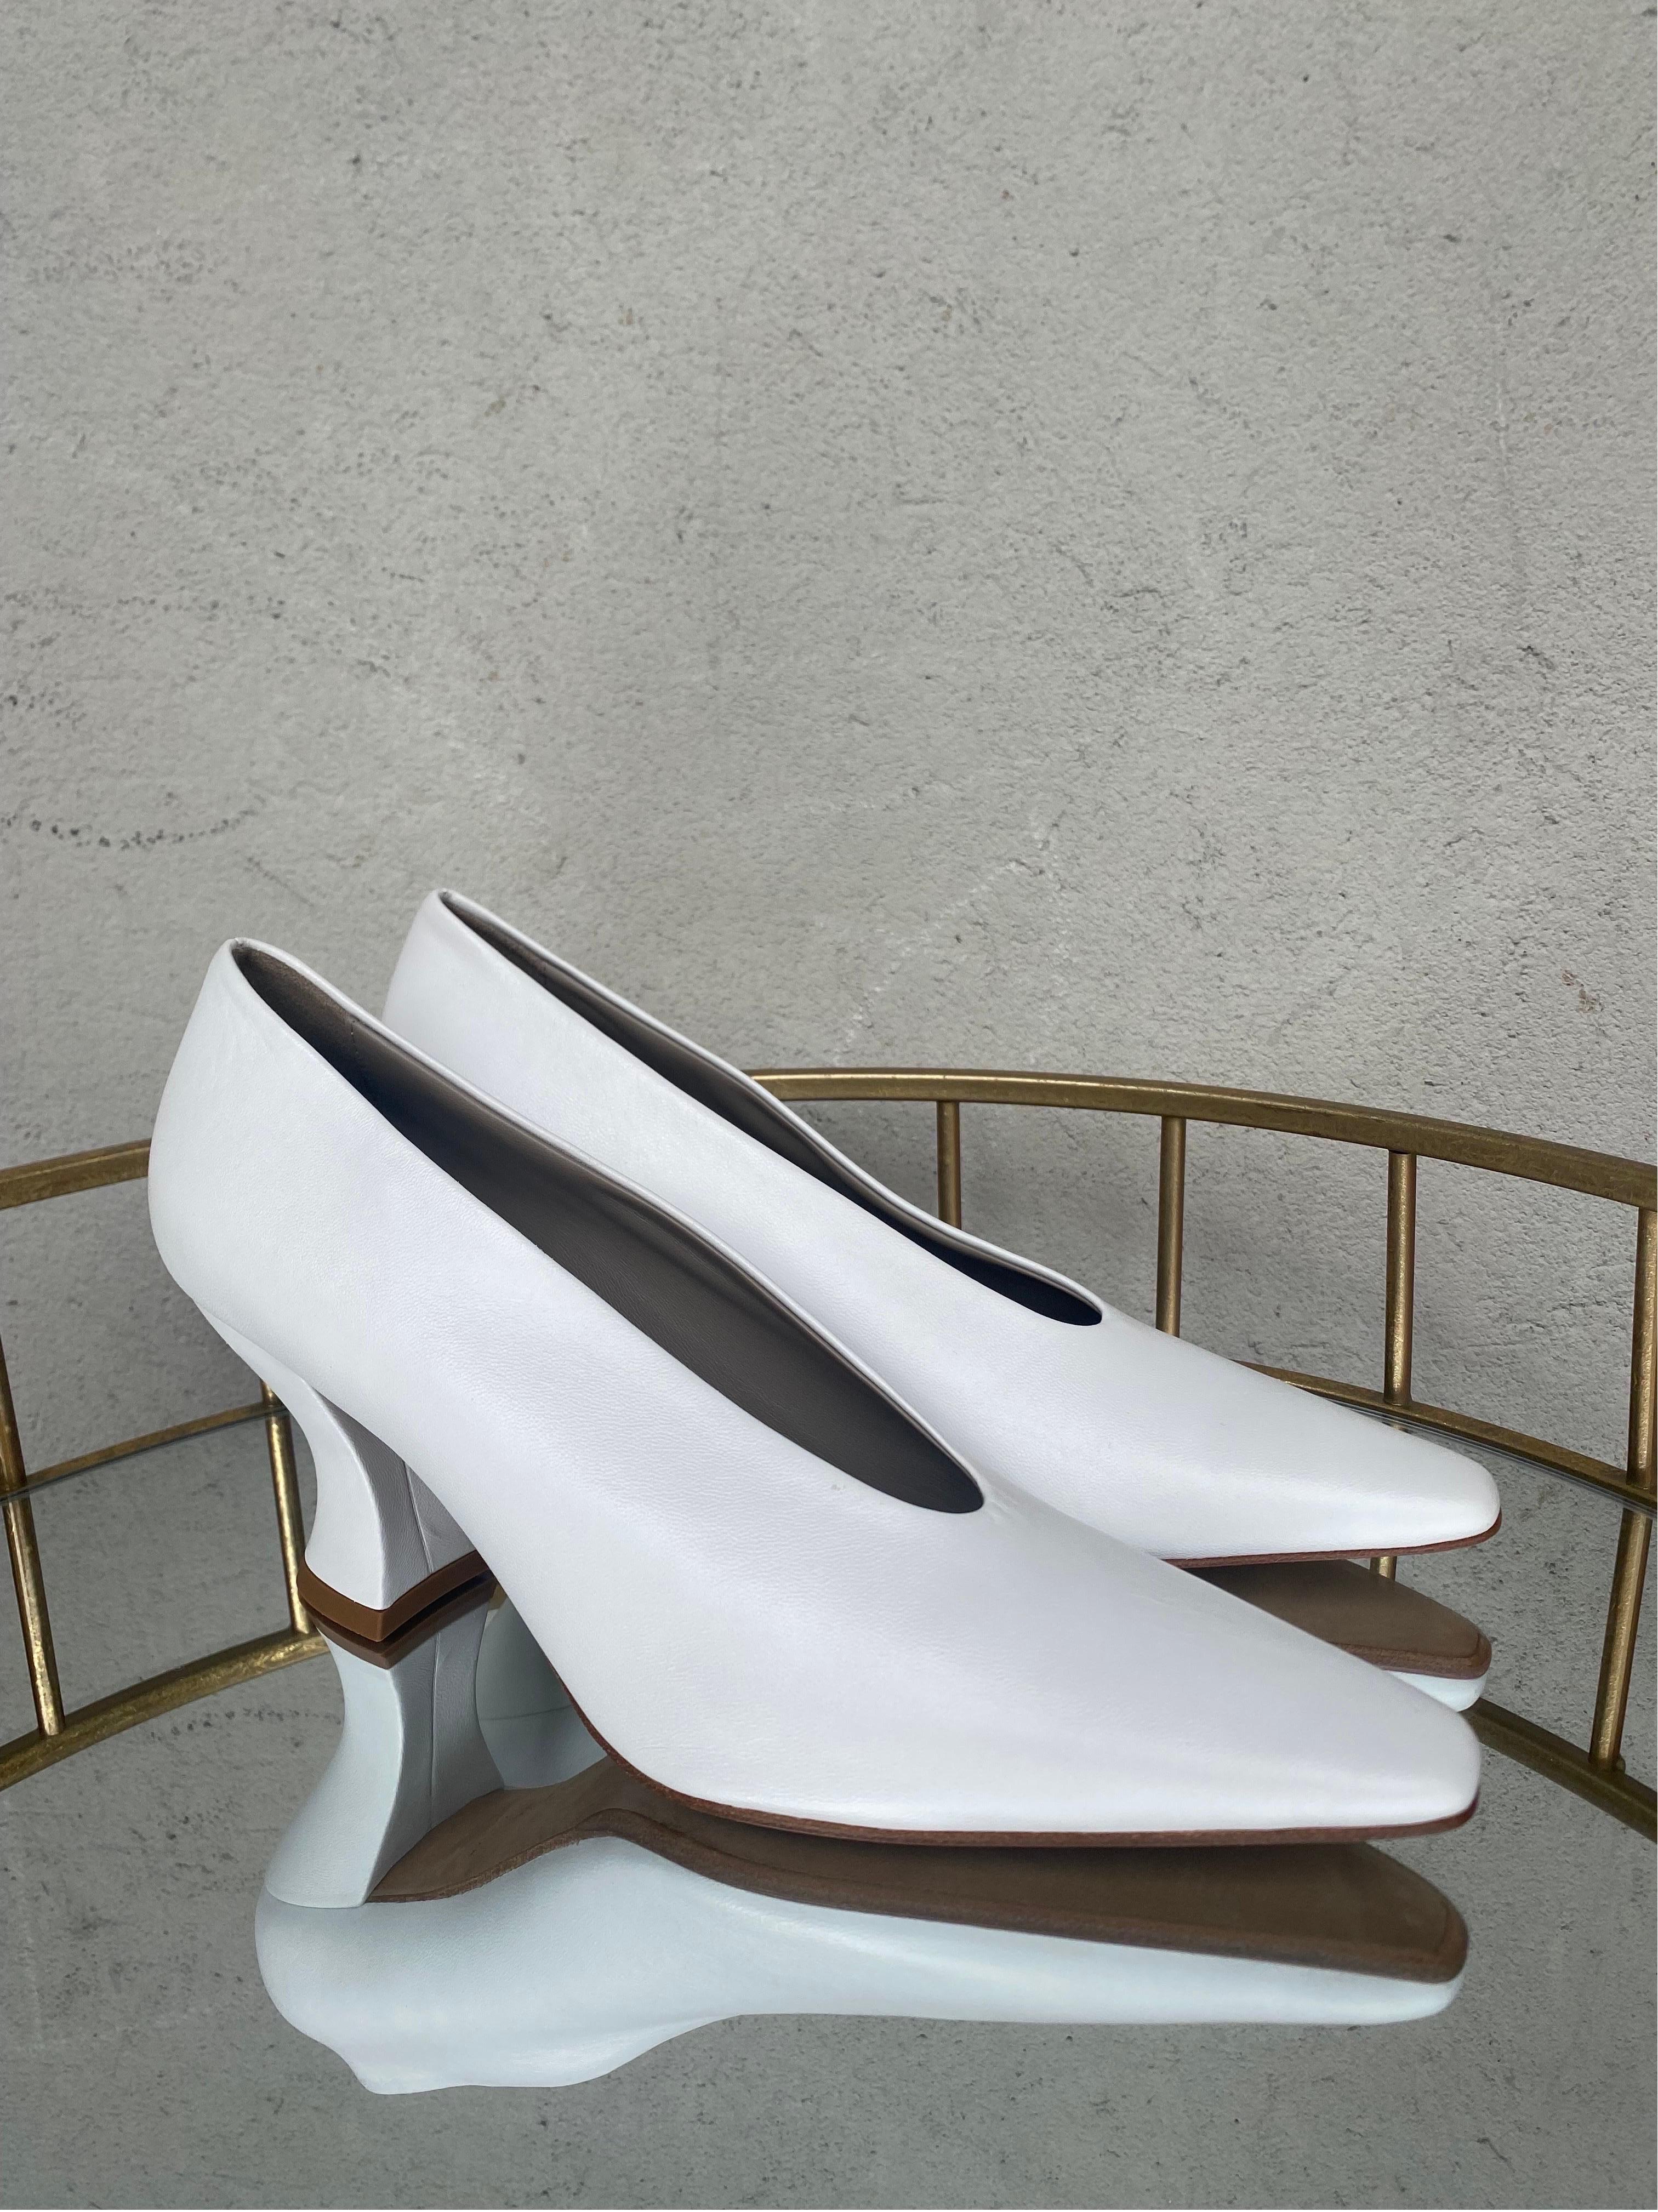 In soft white nappa. Gray interior.
Number 39.
Sole length 25 cm
8cm heel
In excellent condition, used very little. Practically like new.
With original powder.